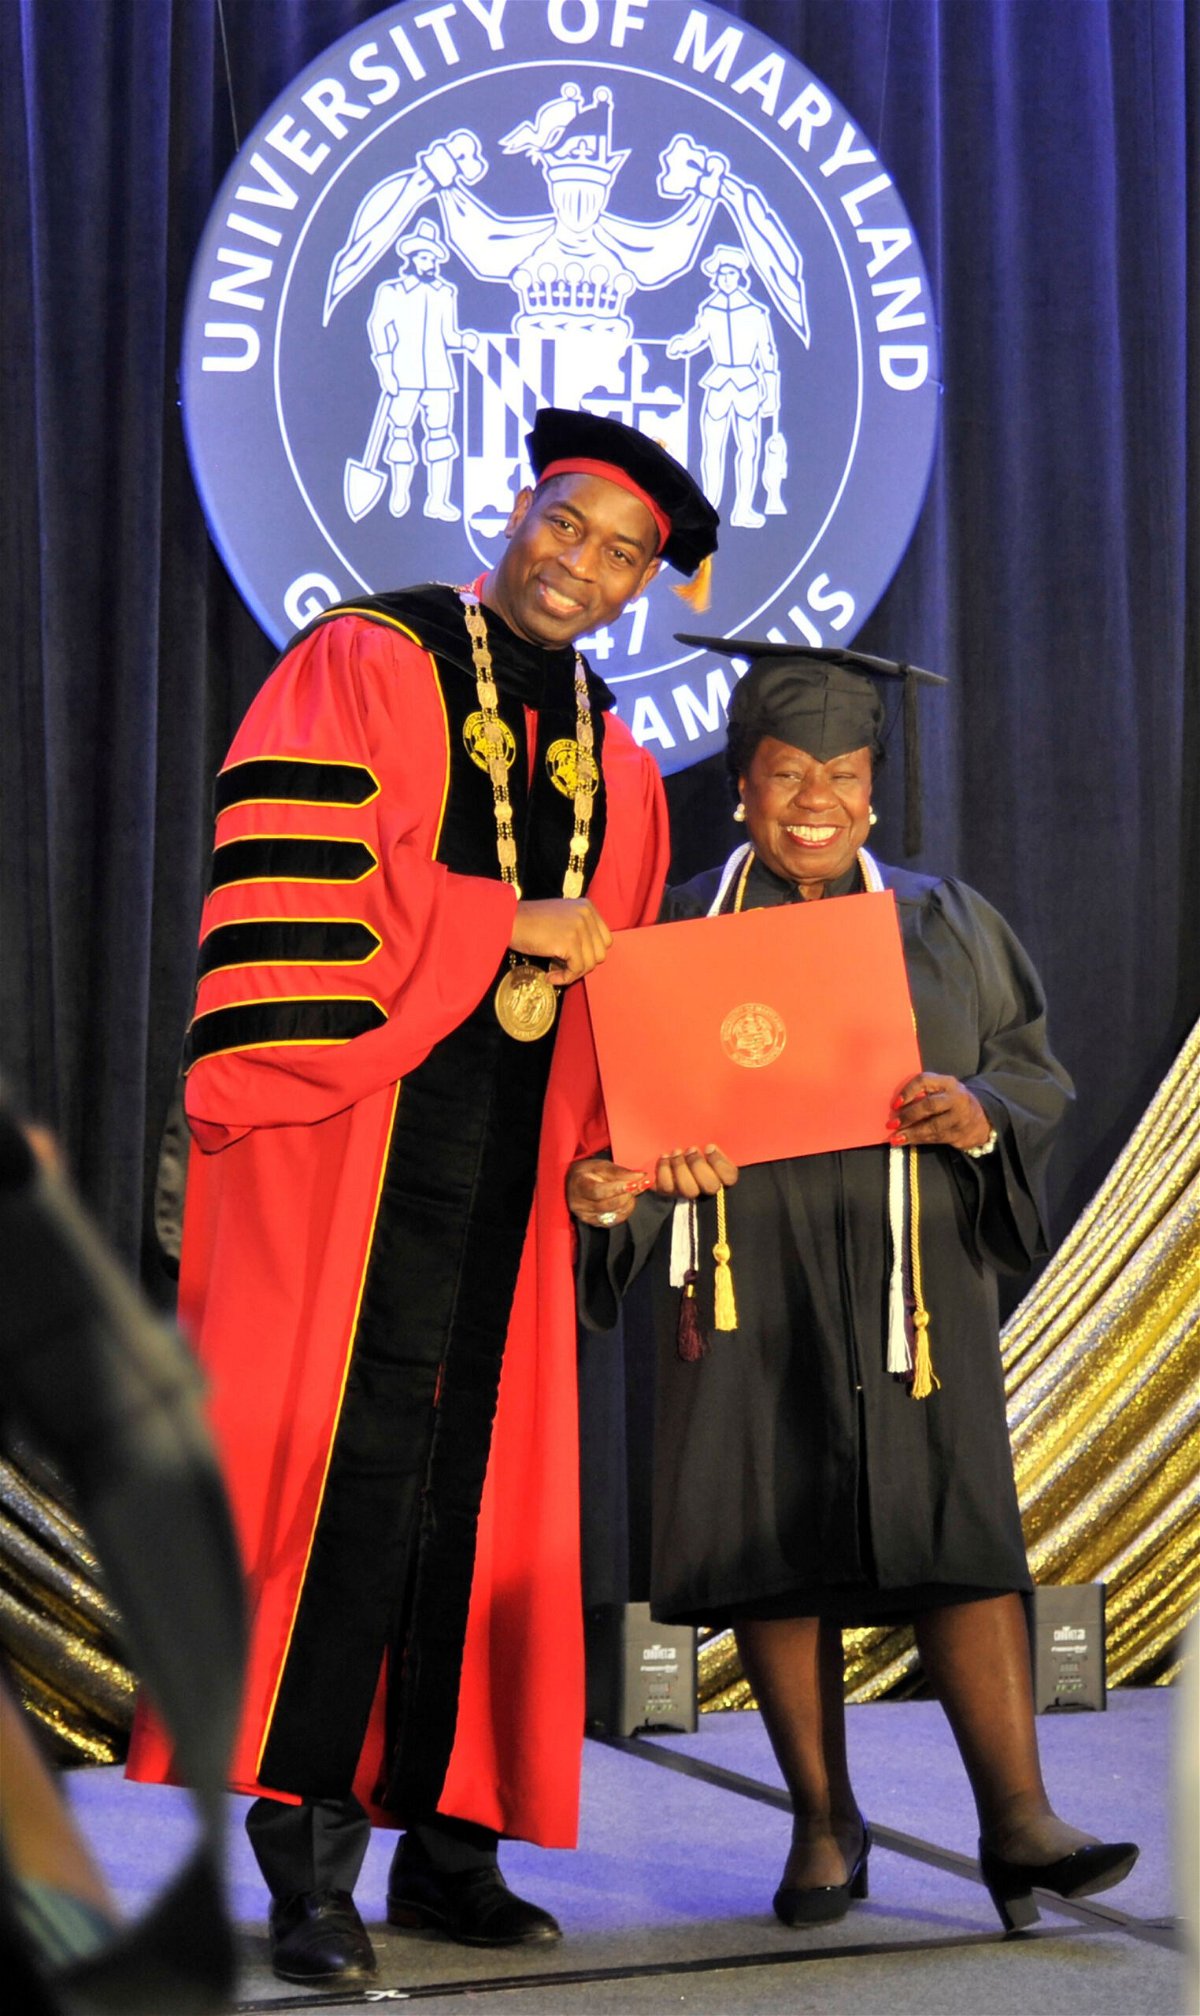 <i>Bob Ludwig/University of Maryland Gloal Campus</i><br/>Mae Beale receives her diploma during a University of Maryland Global Campus commencement ceremony from UMGC President Gregory Fowler.